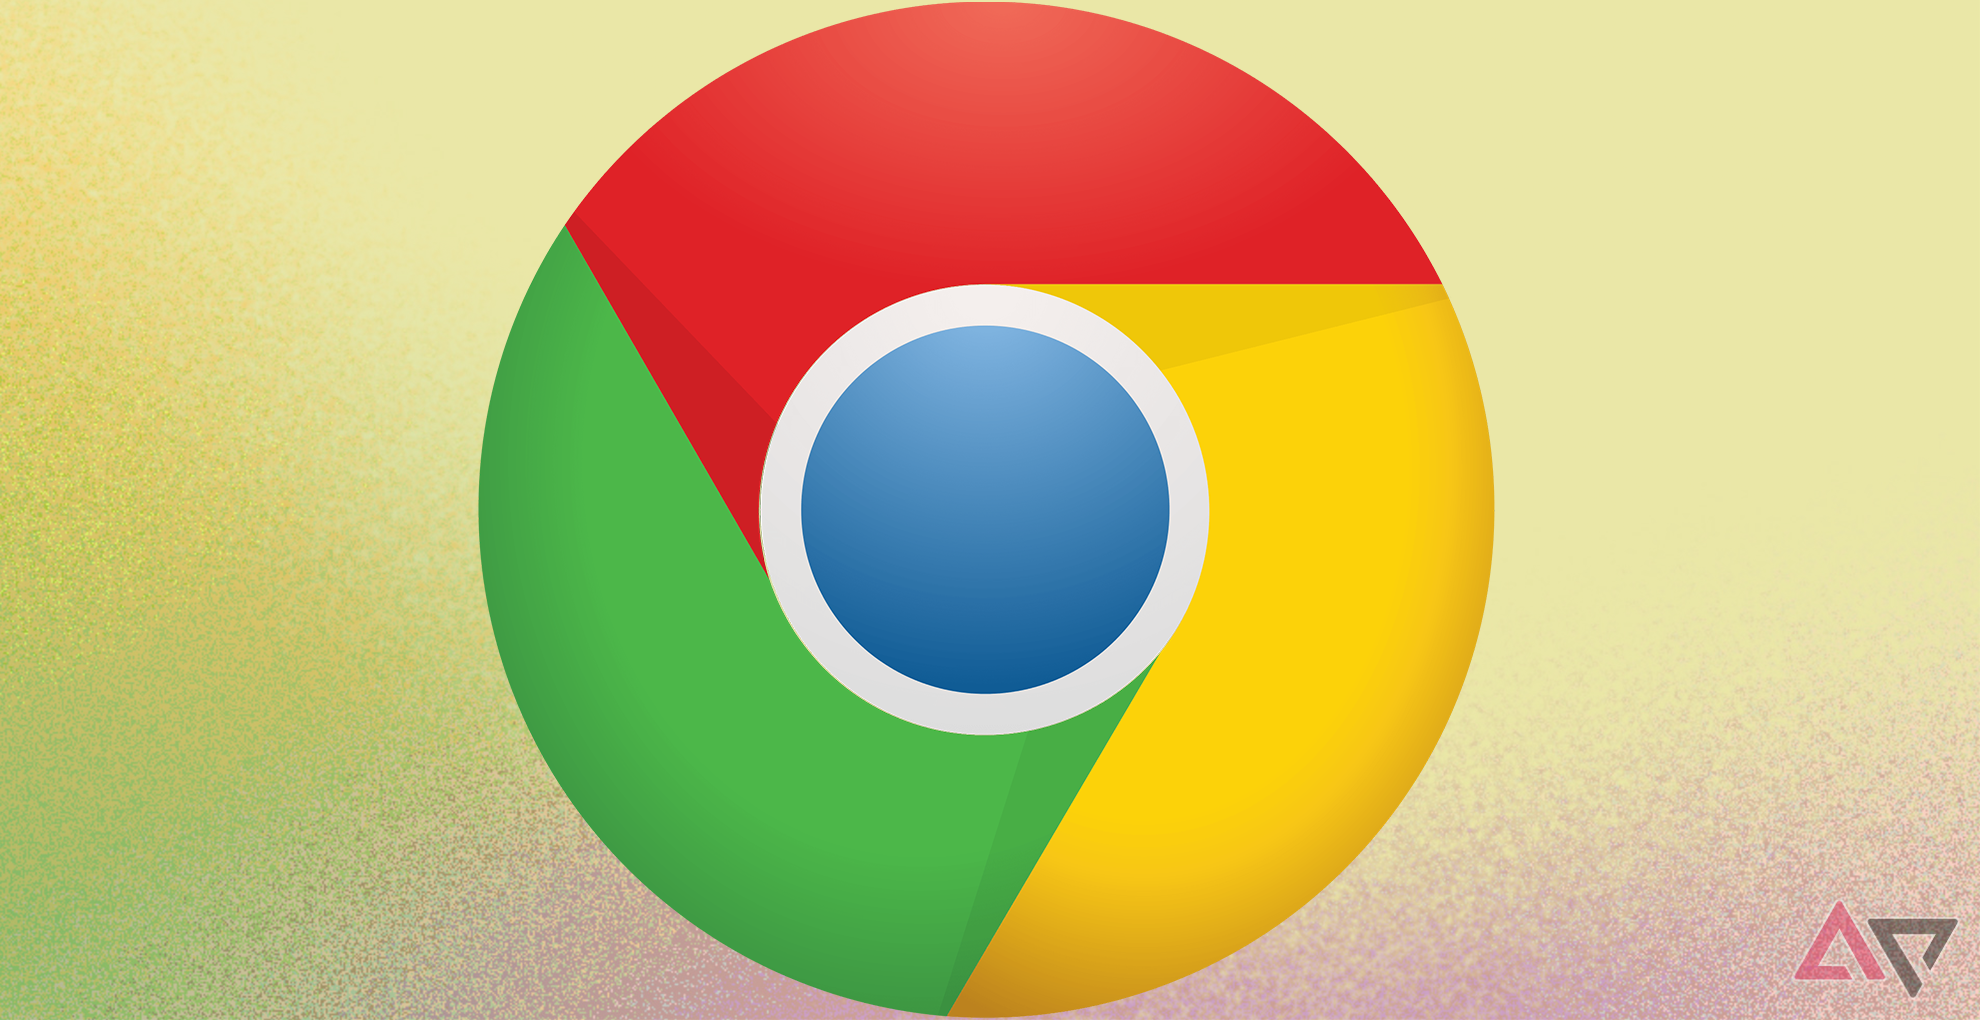 The Google Chrome browser against a yellow and purple background.